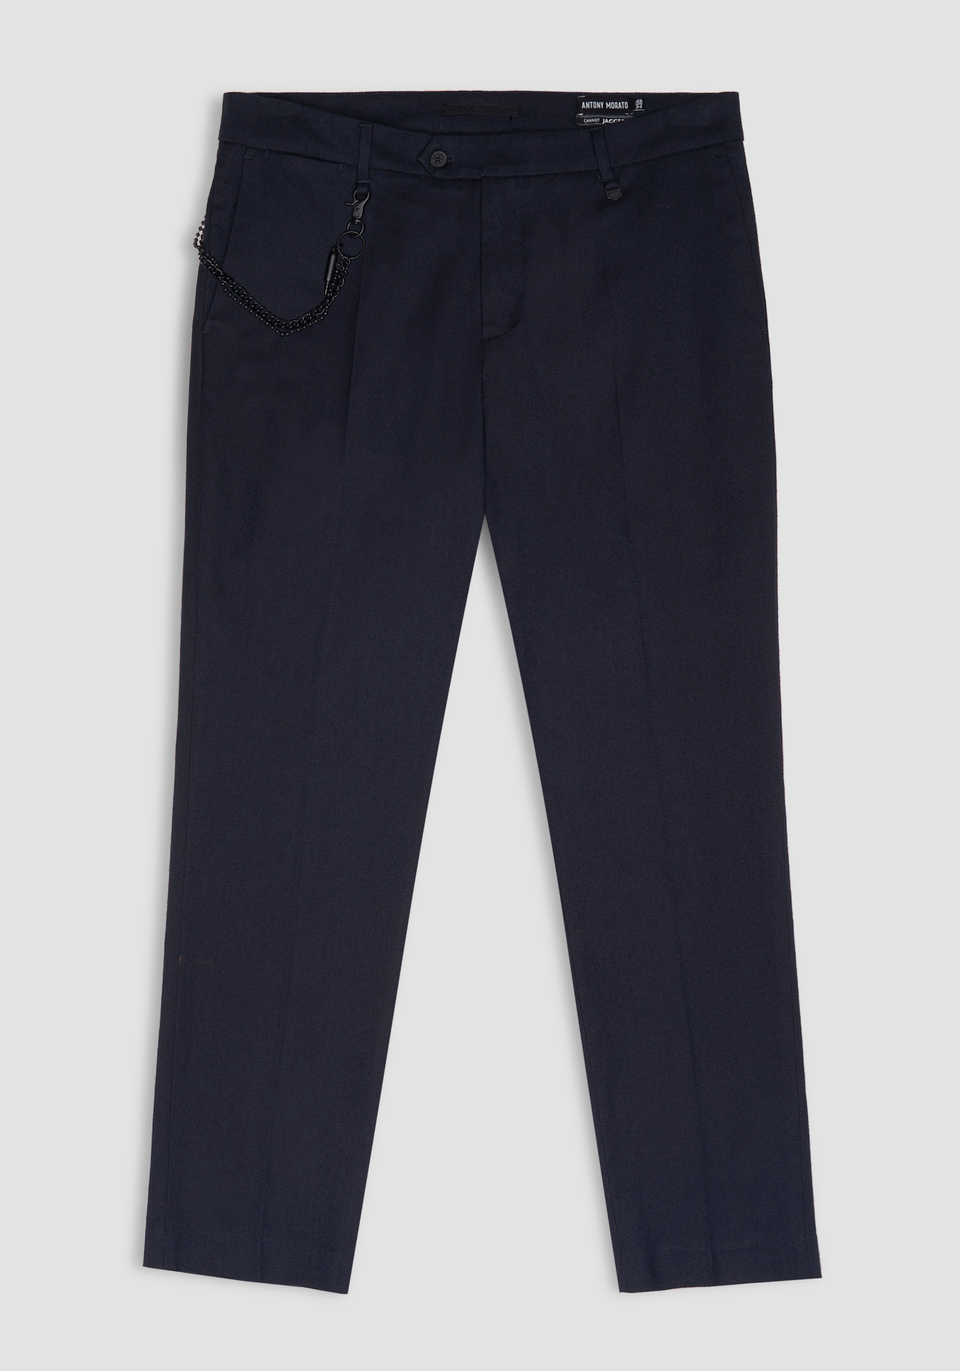 "JAGGER" CARROT FIT TROUSERS - Antony Morato Online Shop